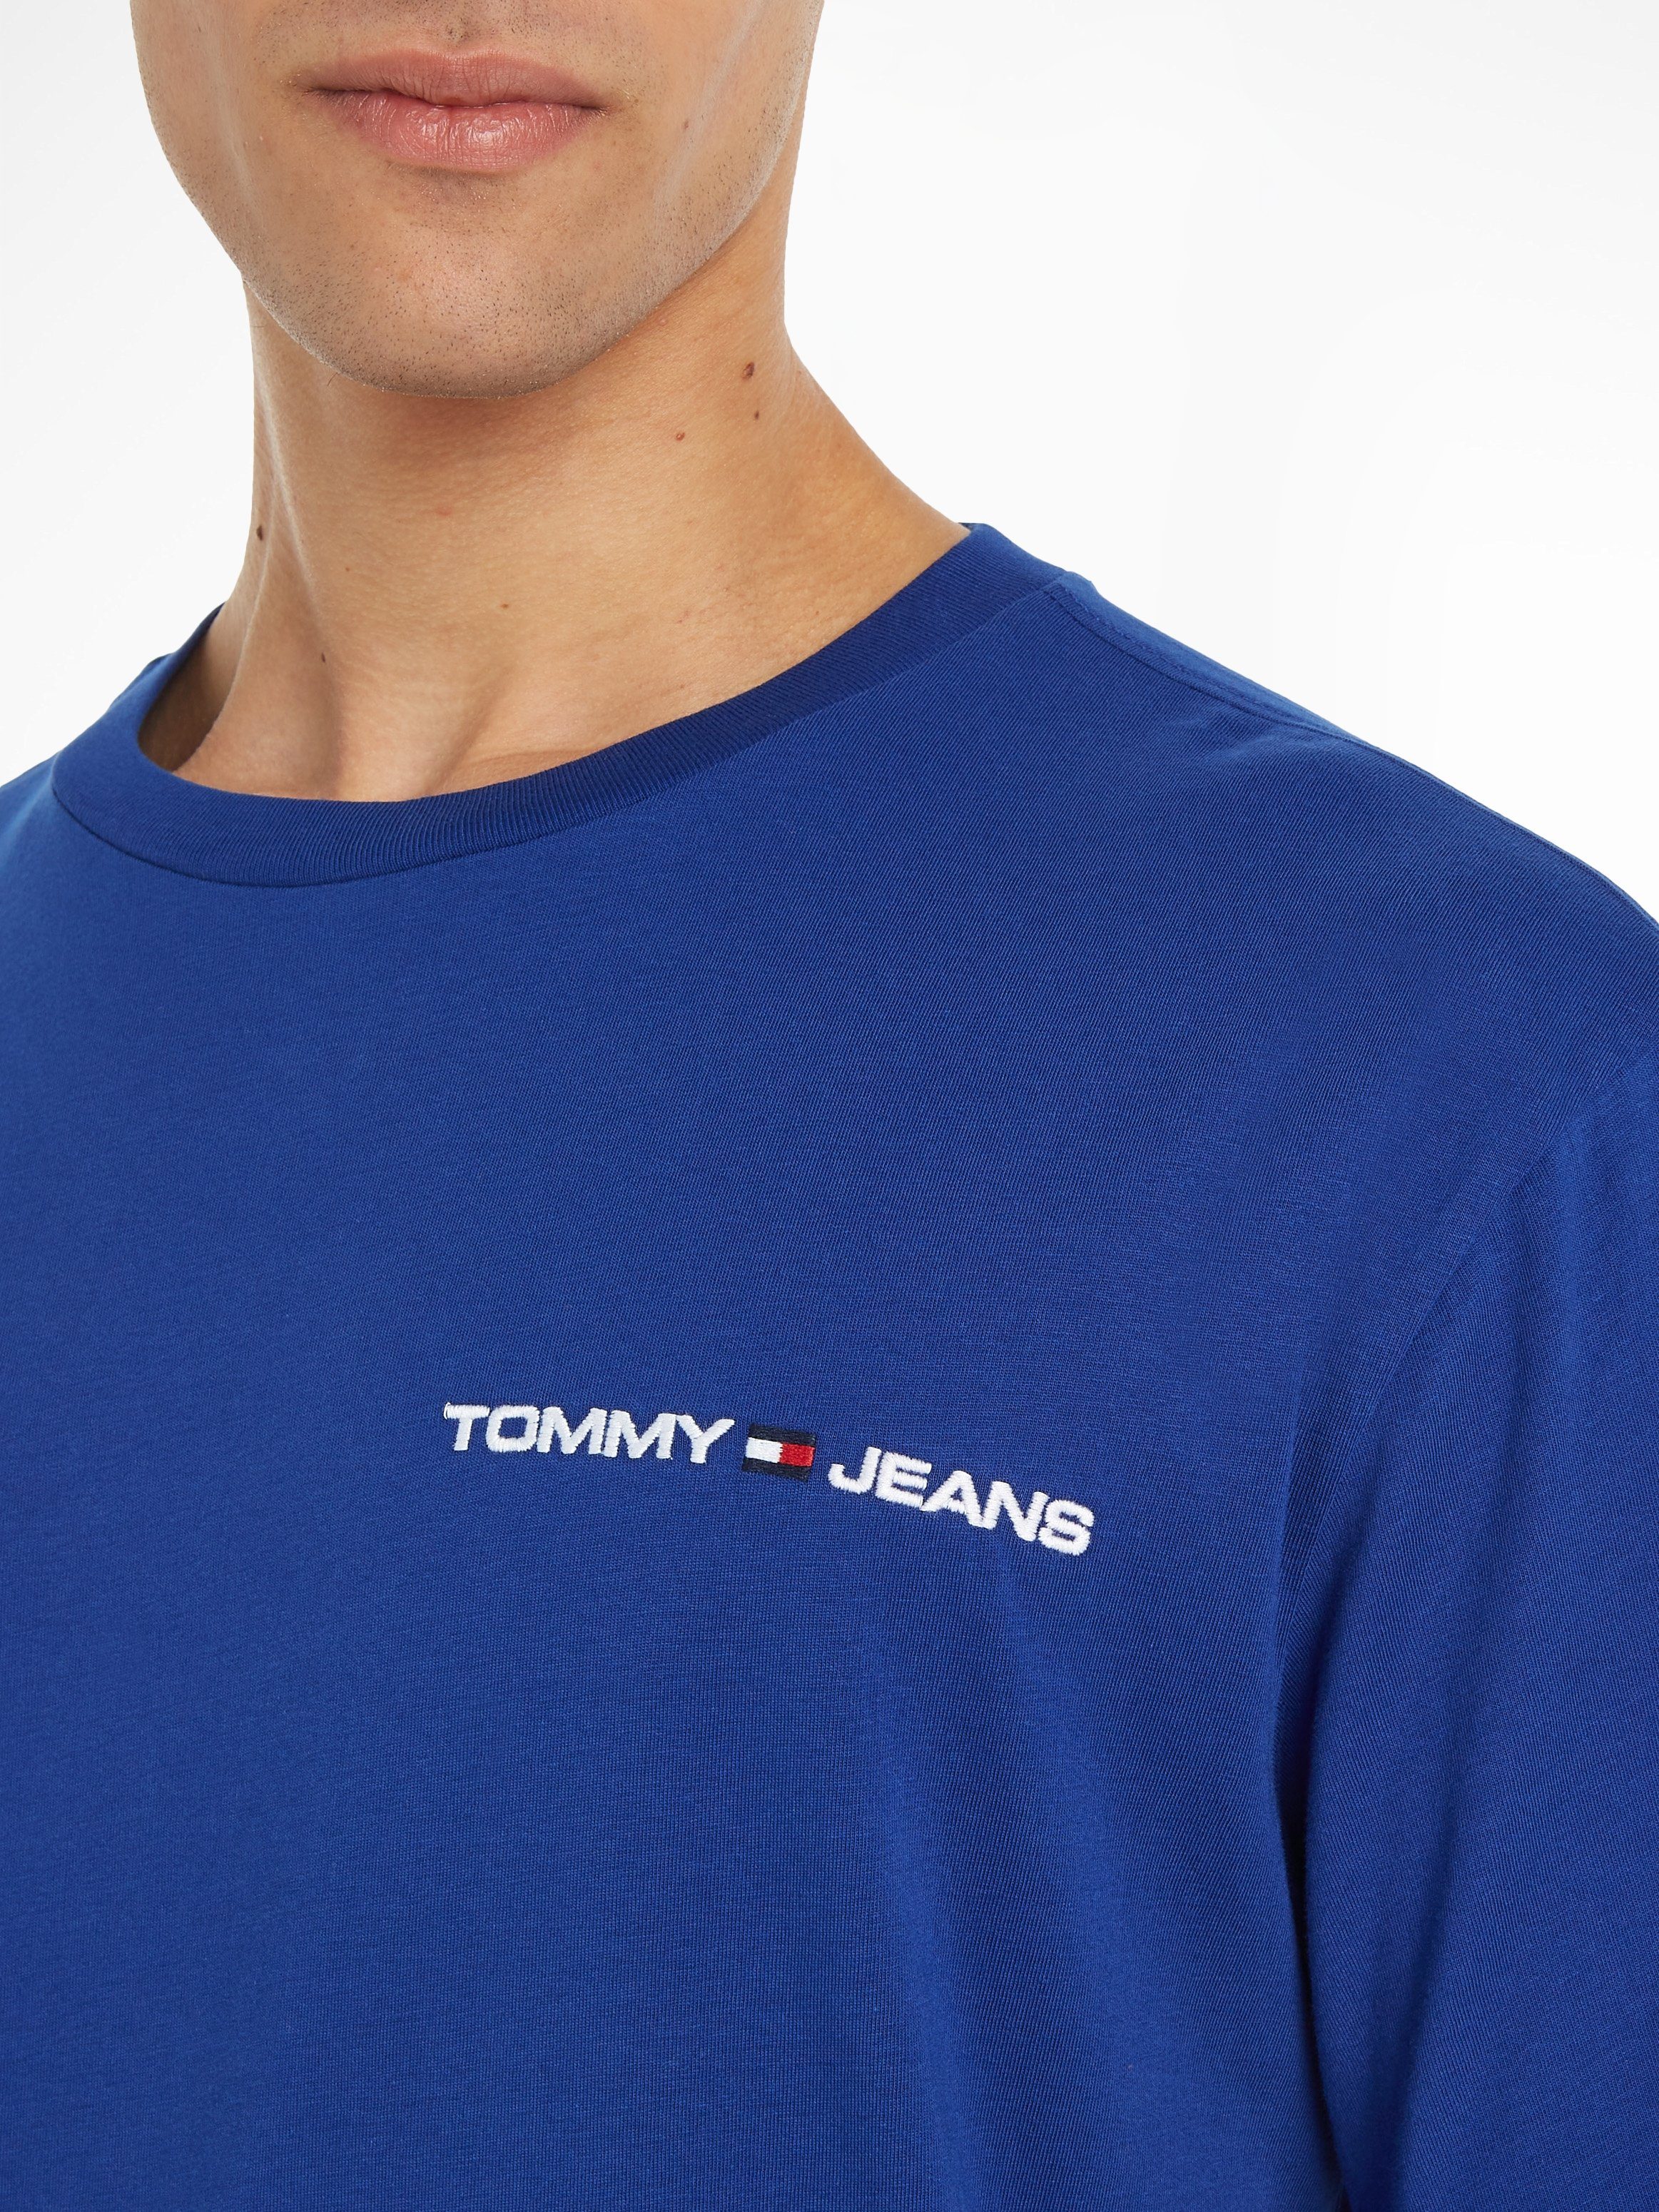 Tommy LINEAR Navy Jeans CHEST T-Shirt TJM Voyage CLSC TEE